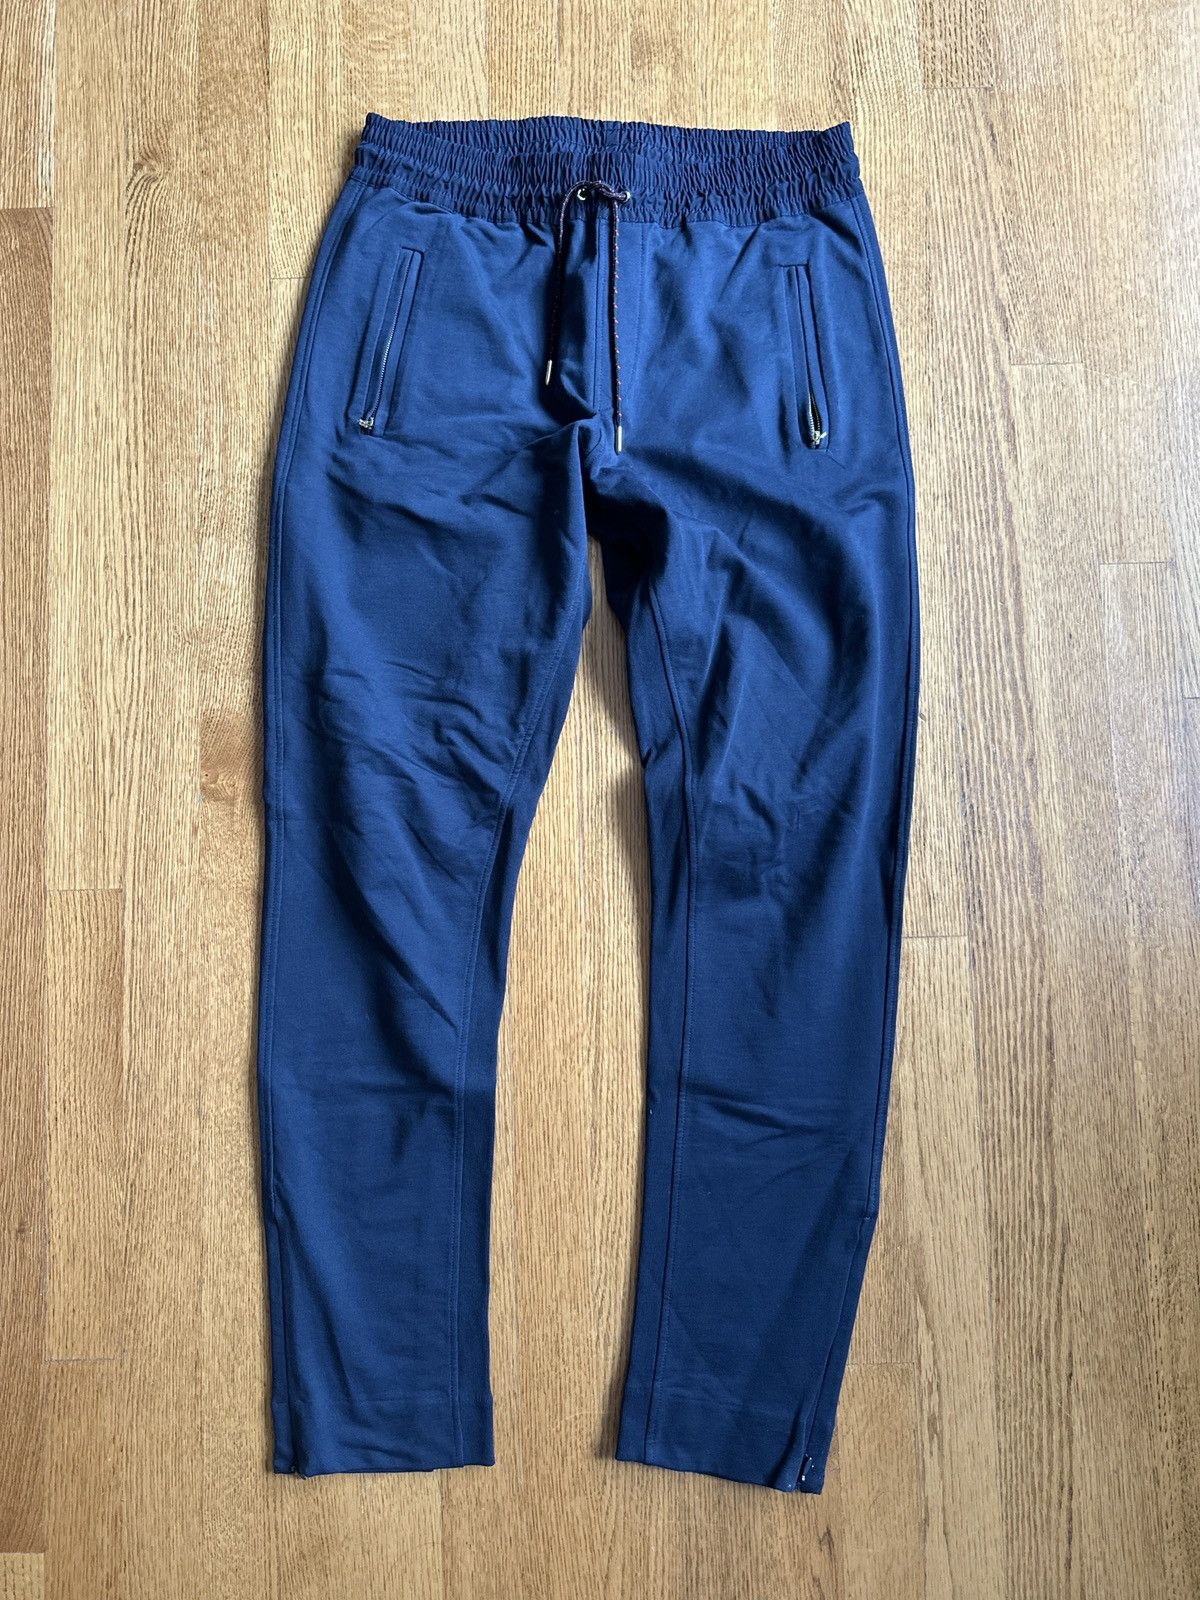 Burberry BURBERRY TAPERED SWEATPANTS Size US 28 / EU 44 - 1 Preview